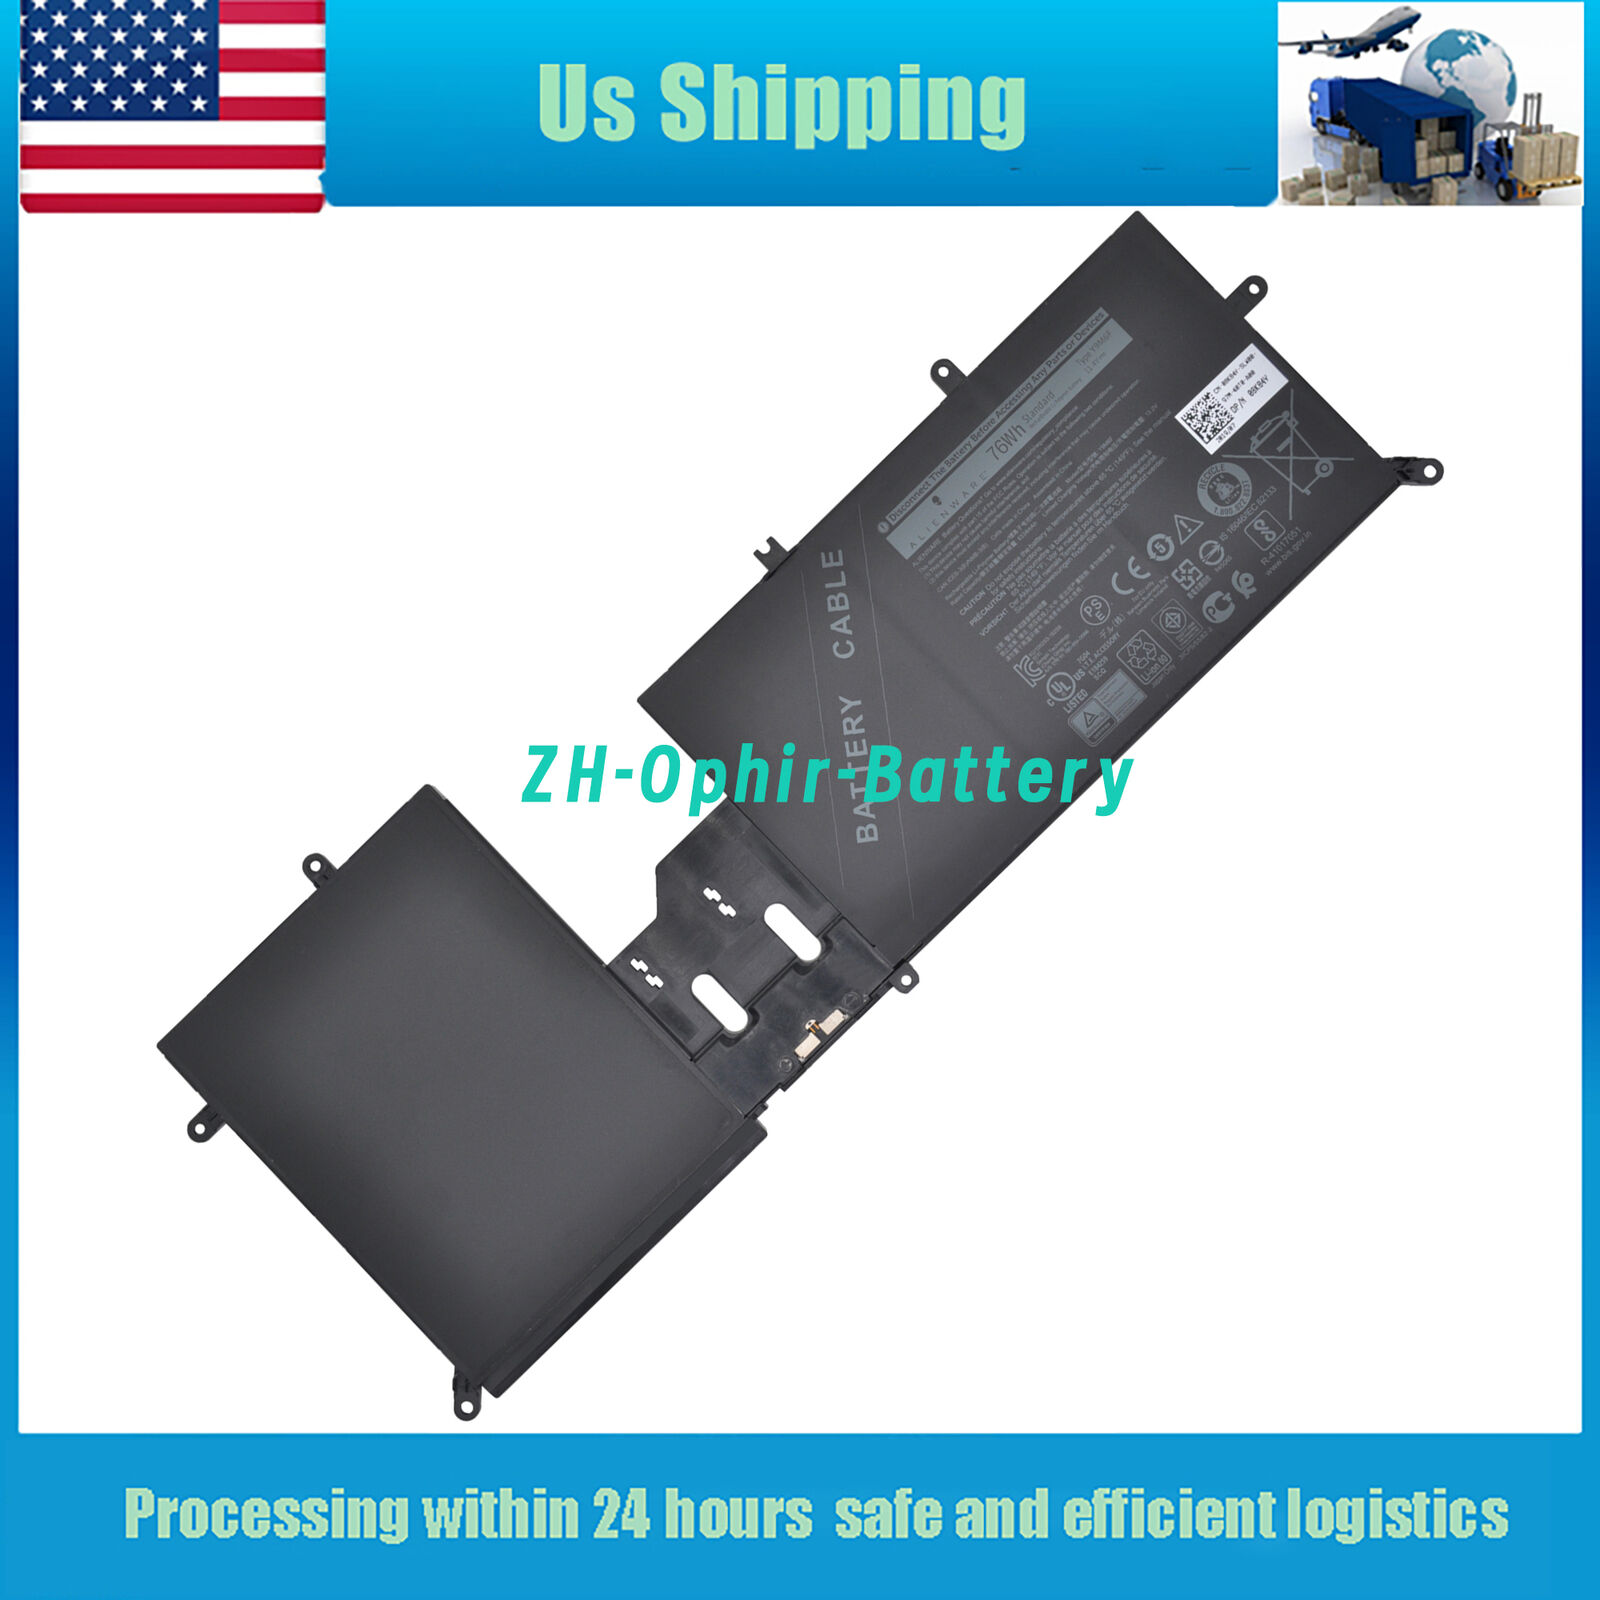 New Genuine Y9M6F Laptop Battery for Dell  M15 R2 M17 R2 8K84Y 0Y9M6F 76Wh 11.4V